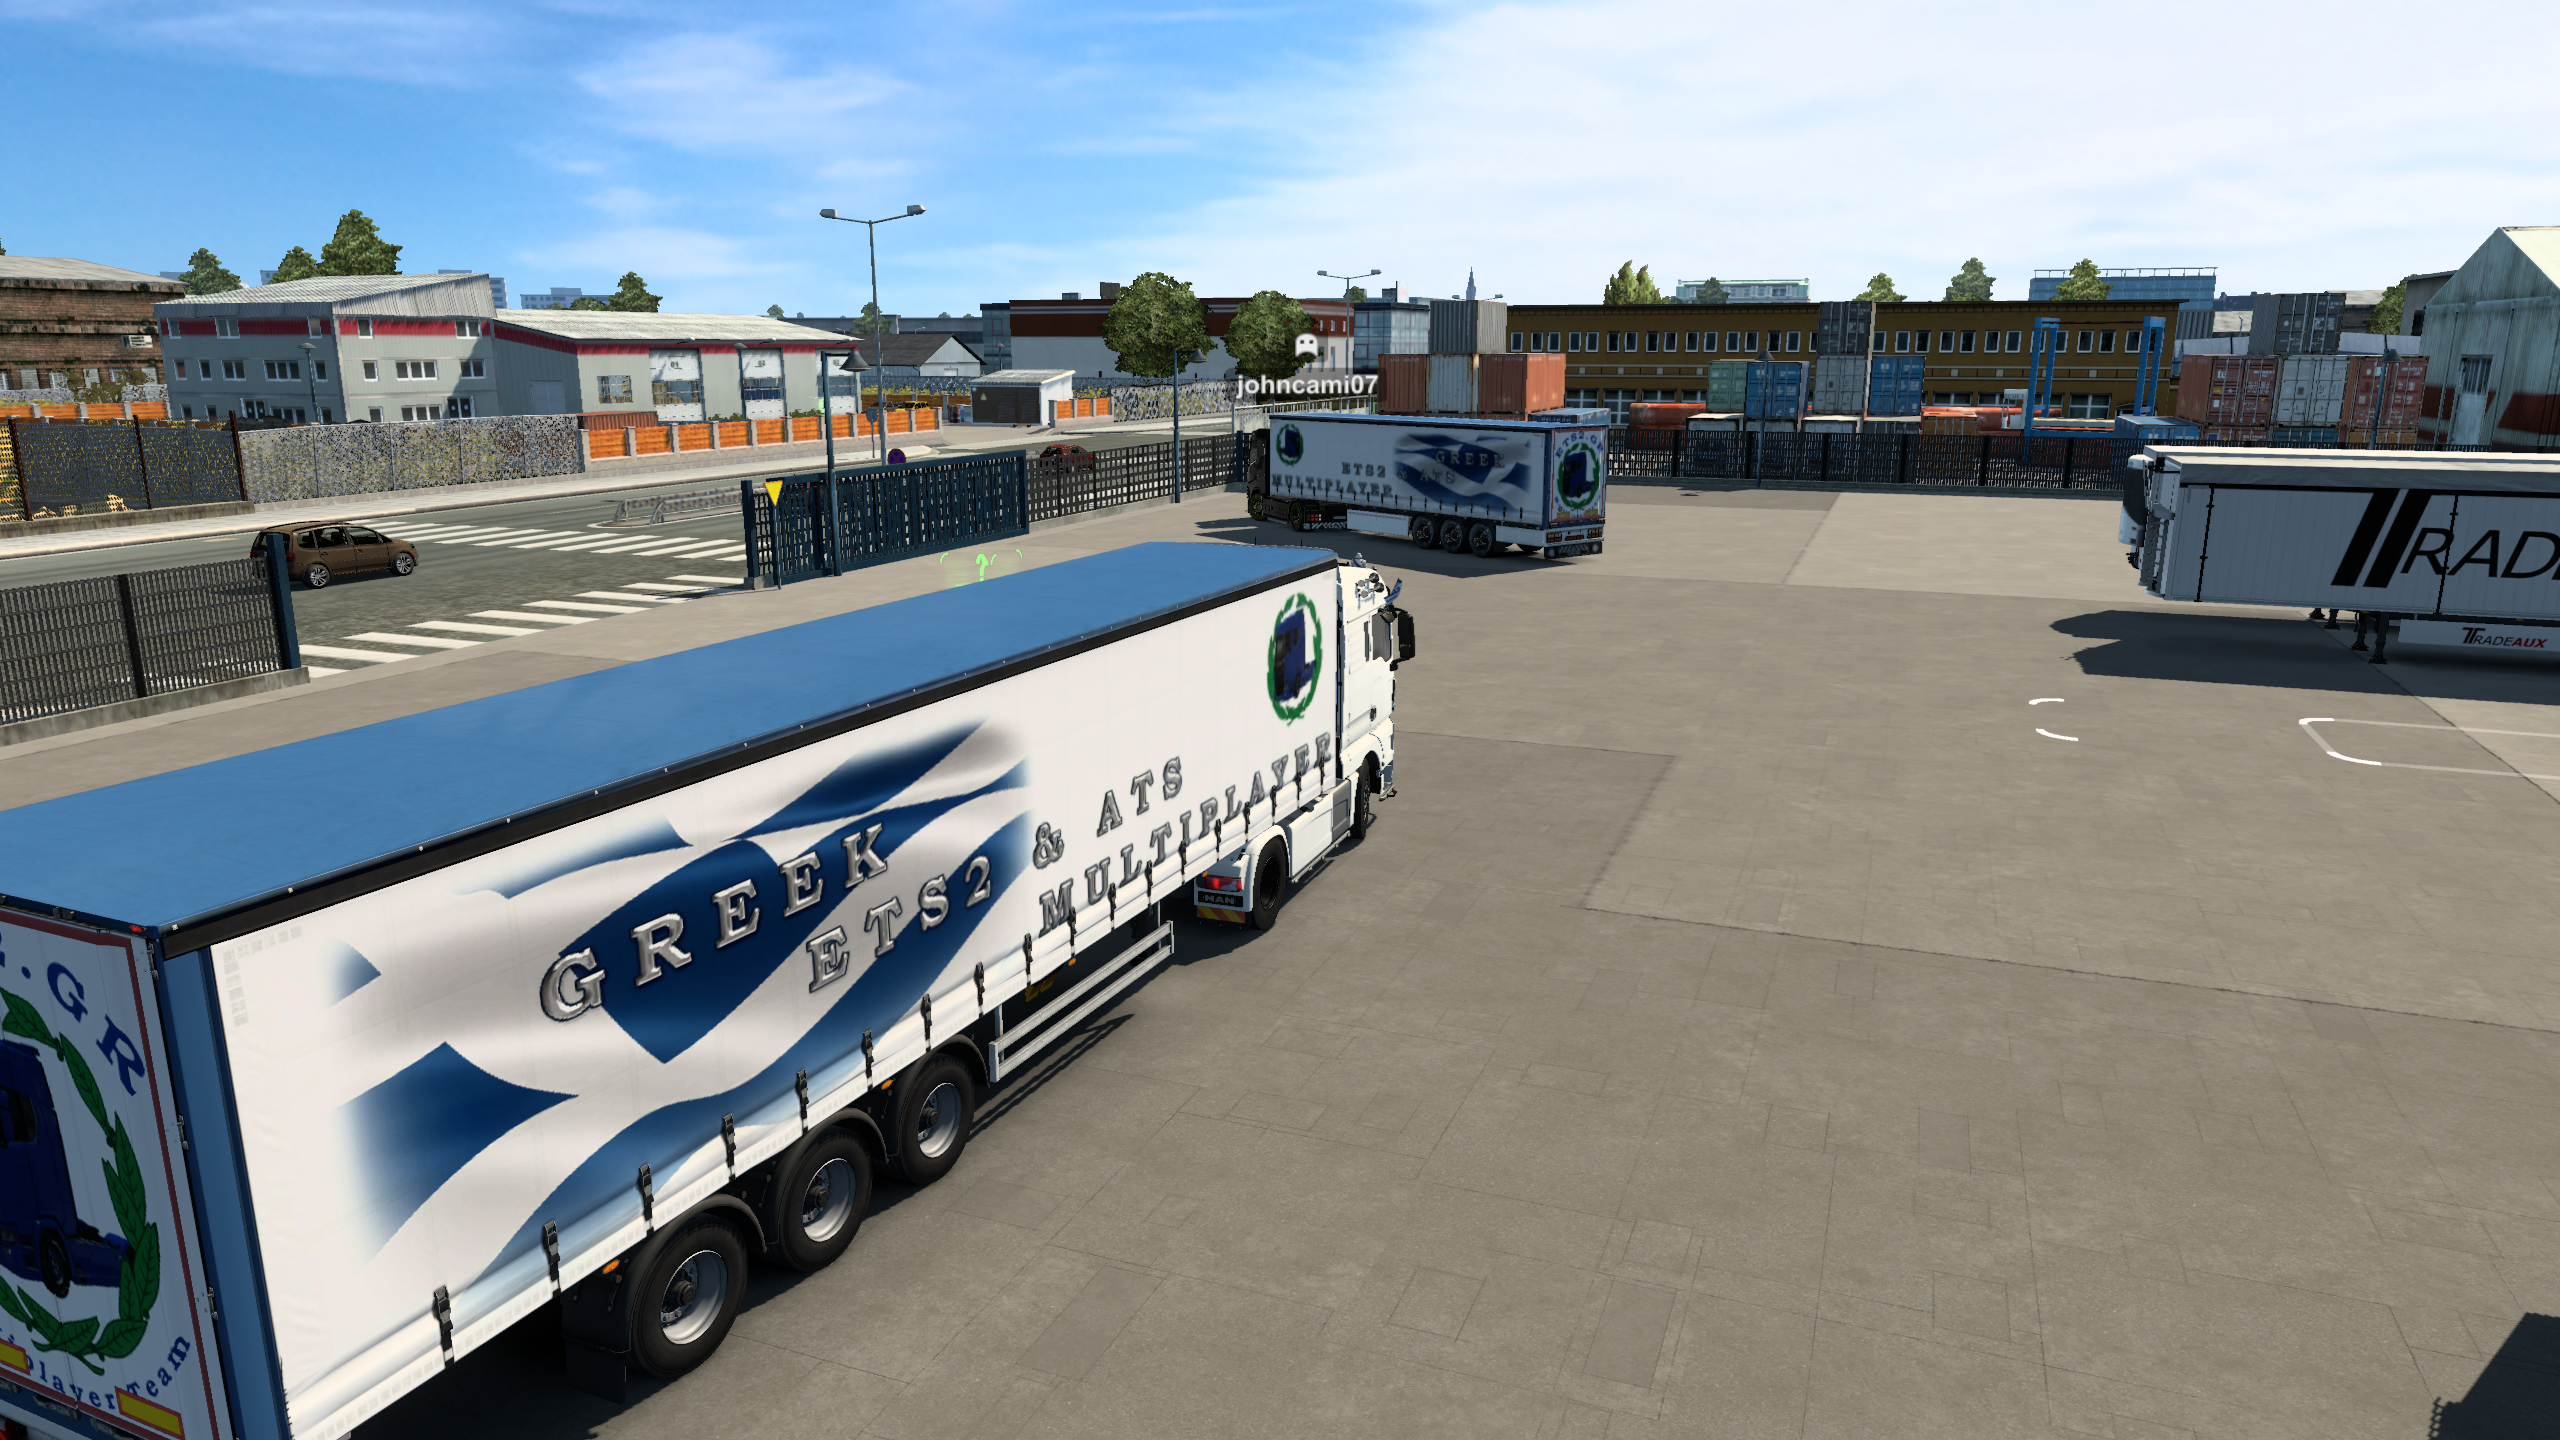 ets2_20220306_232047_00.png